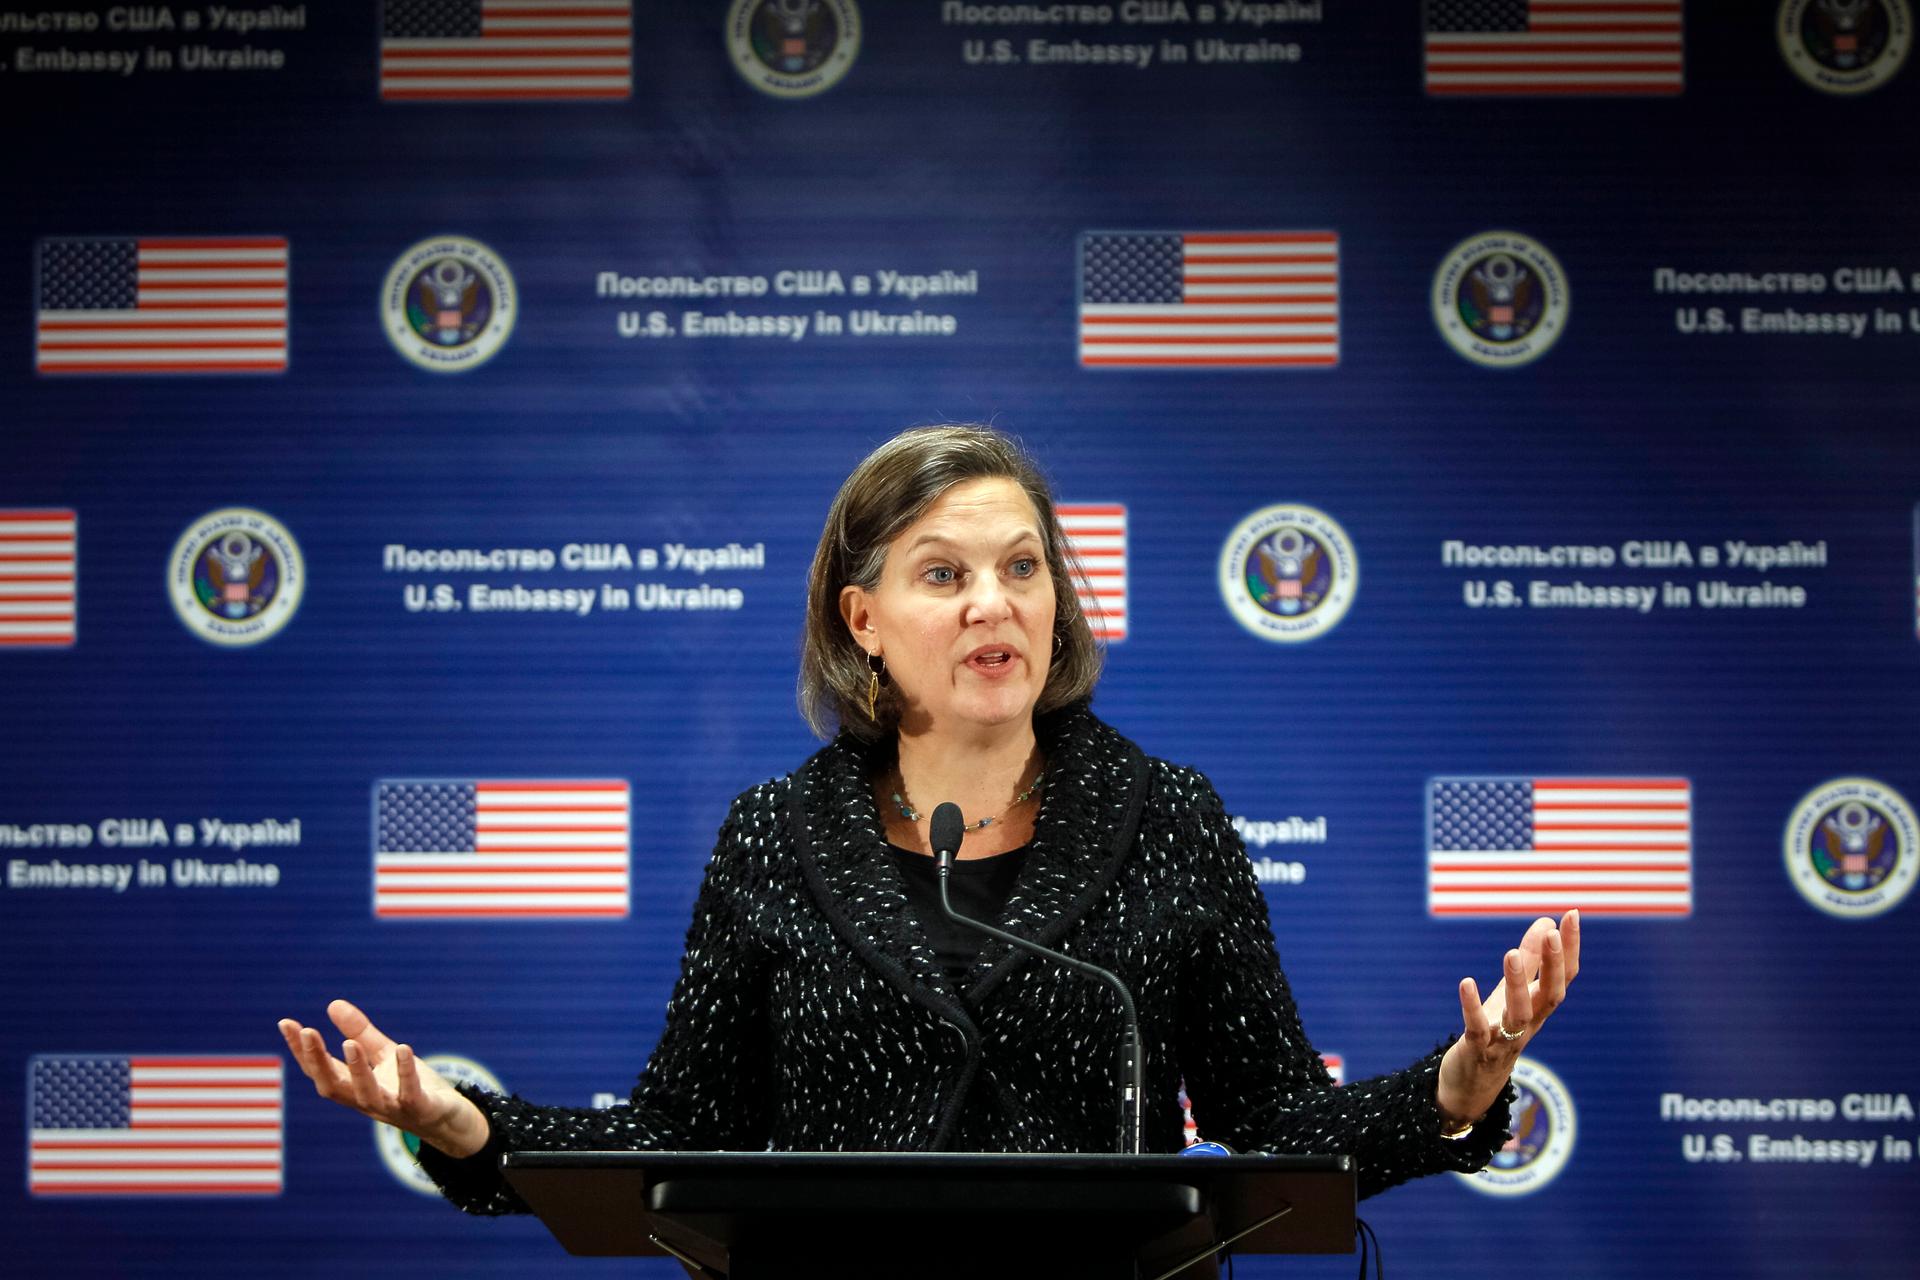 U.S. Assistant Secretary of State, Victoria Nuland addresses a news conference at the American embassy in Kiev, Ukraine on February 7, 2014.